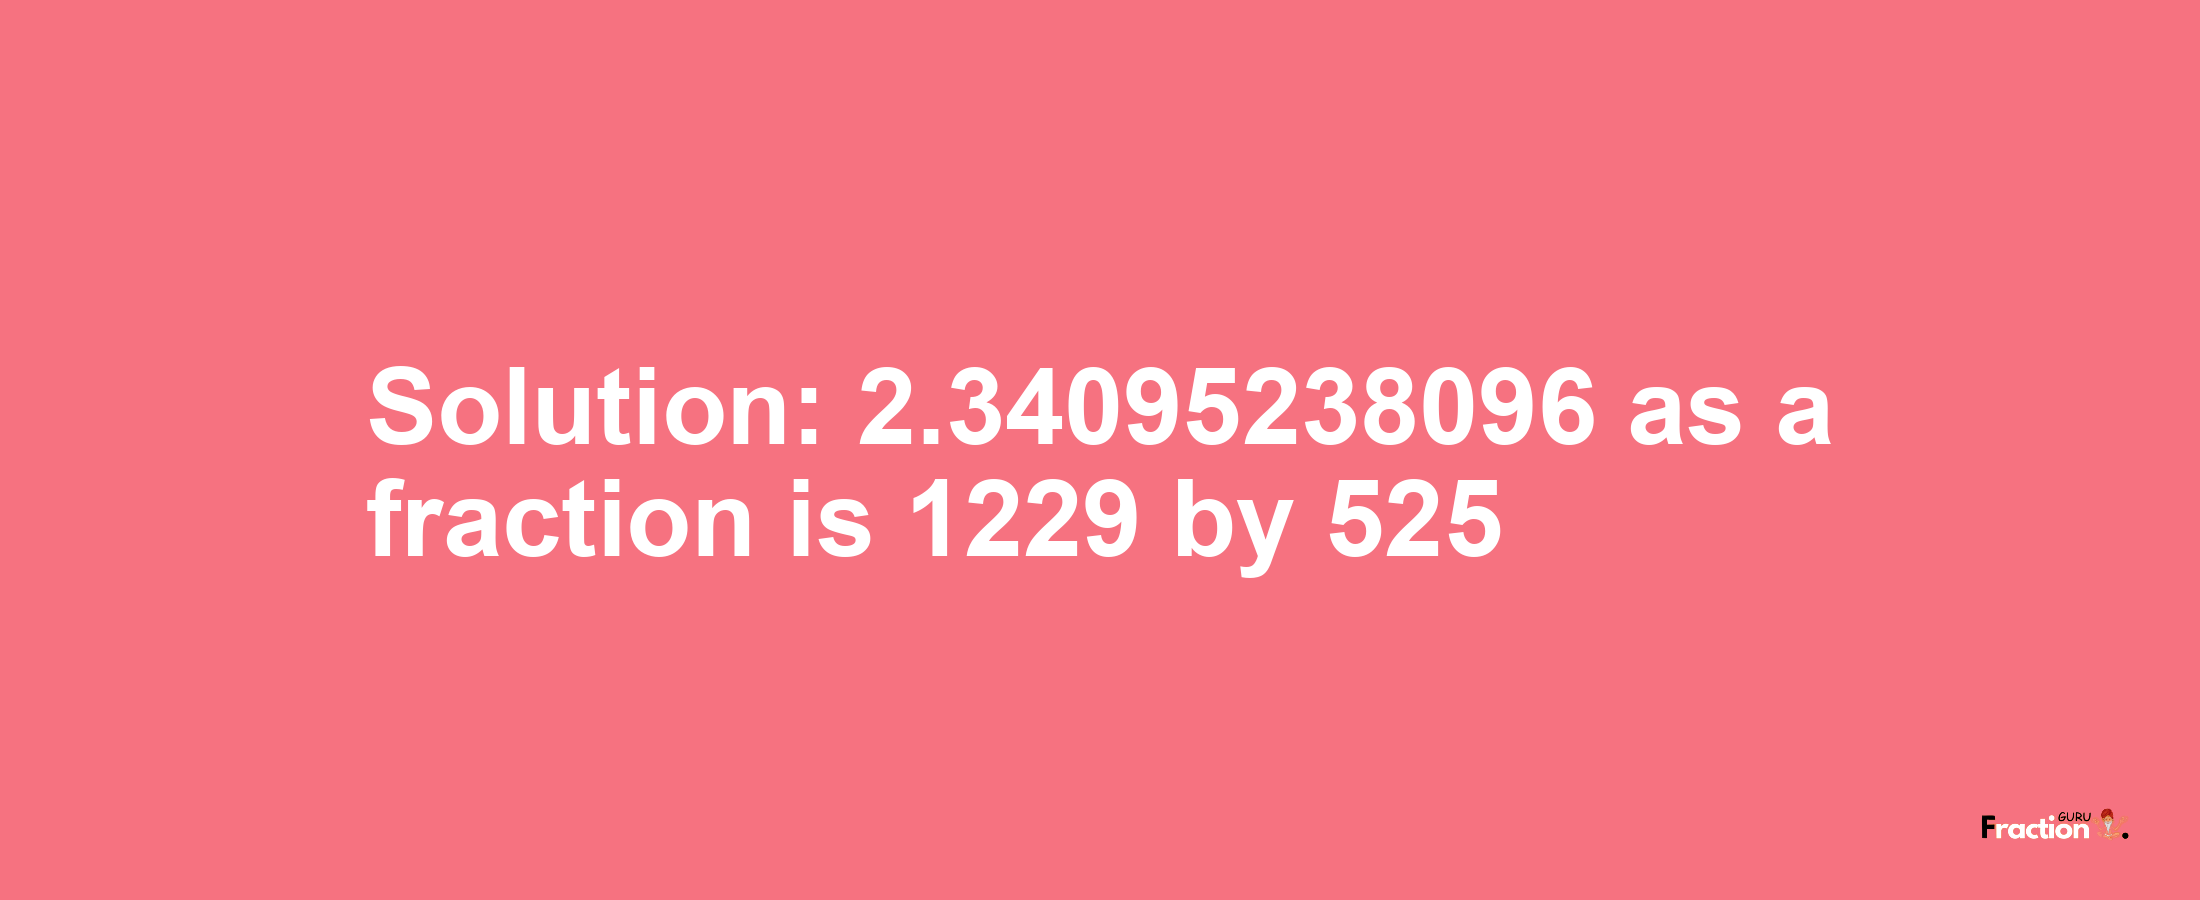 Solution:2.34095238096 as a fraction is 1229/525